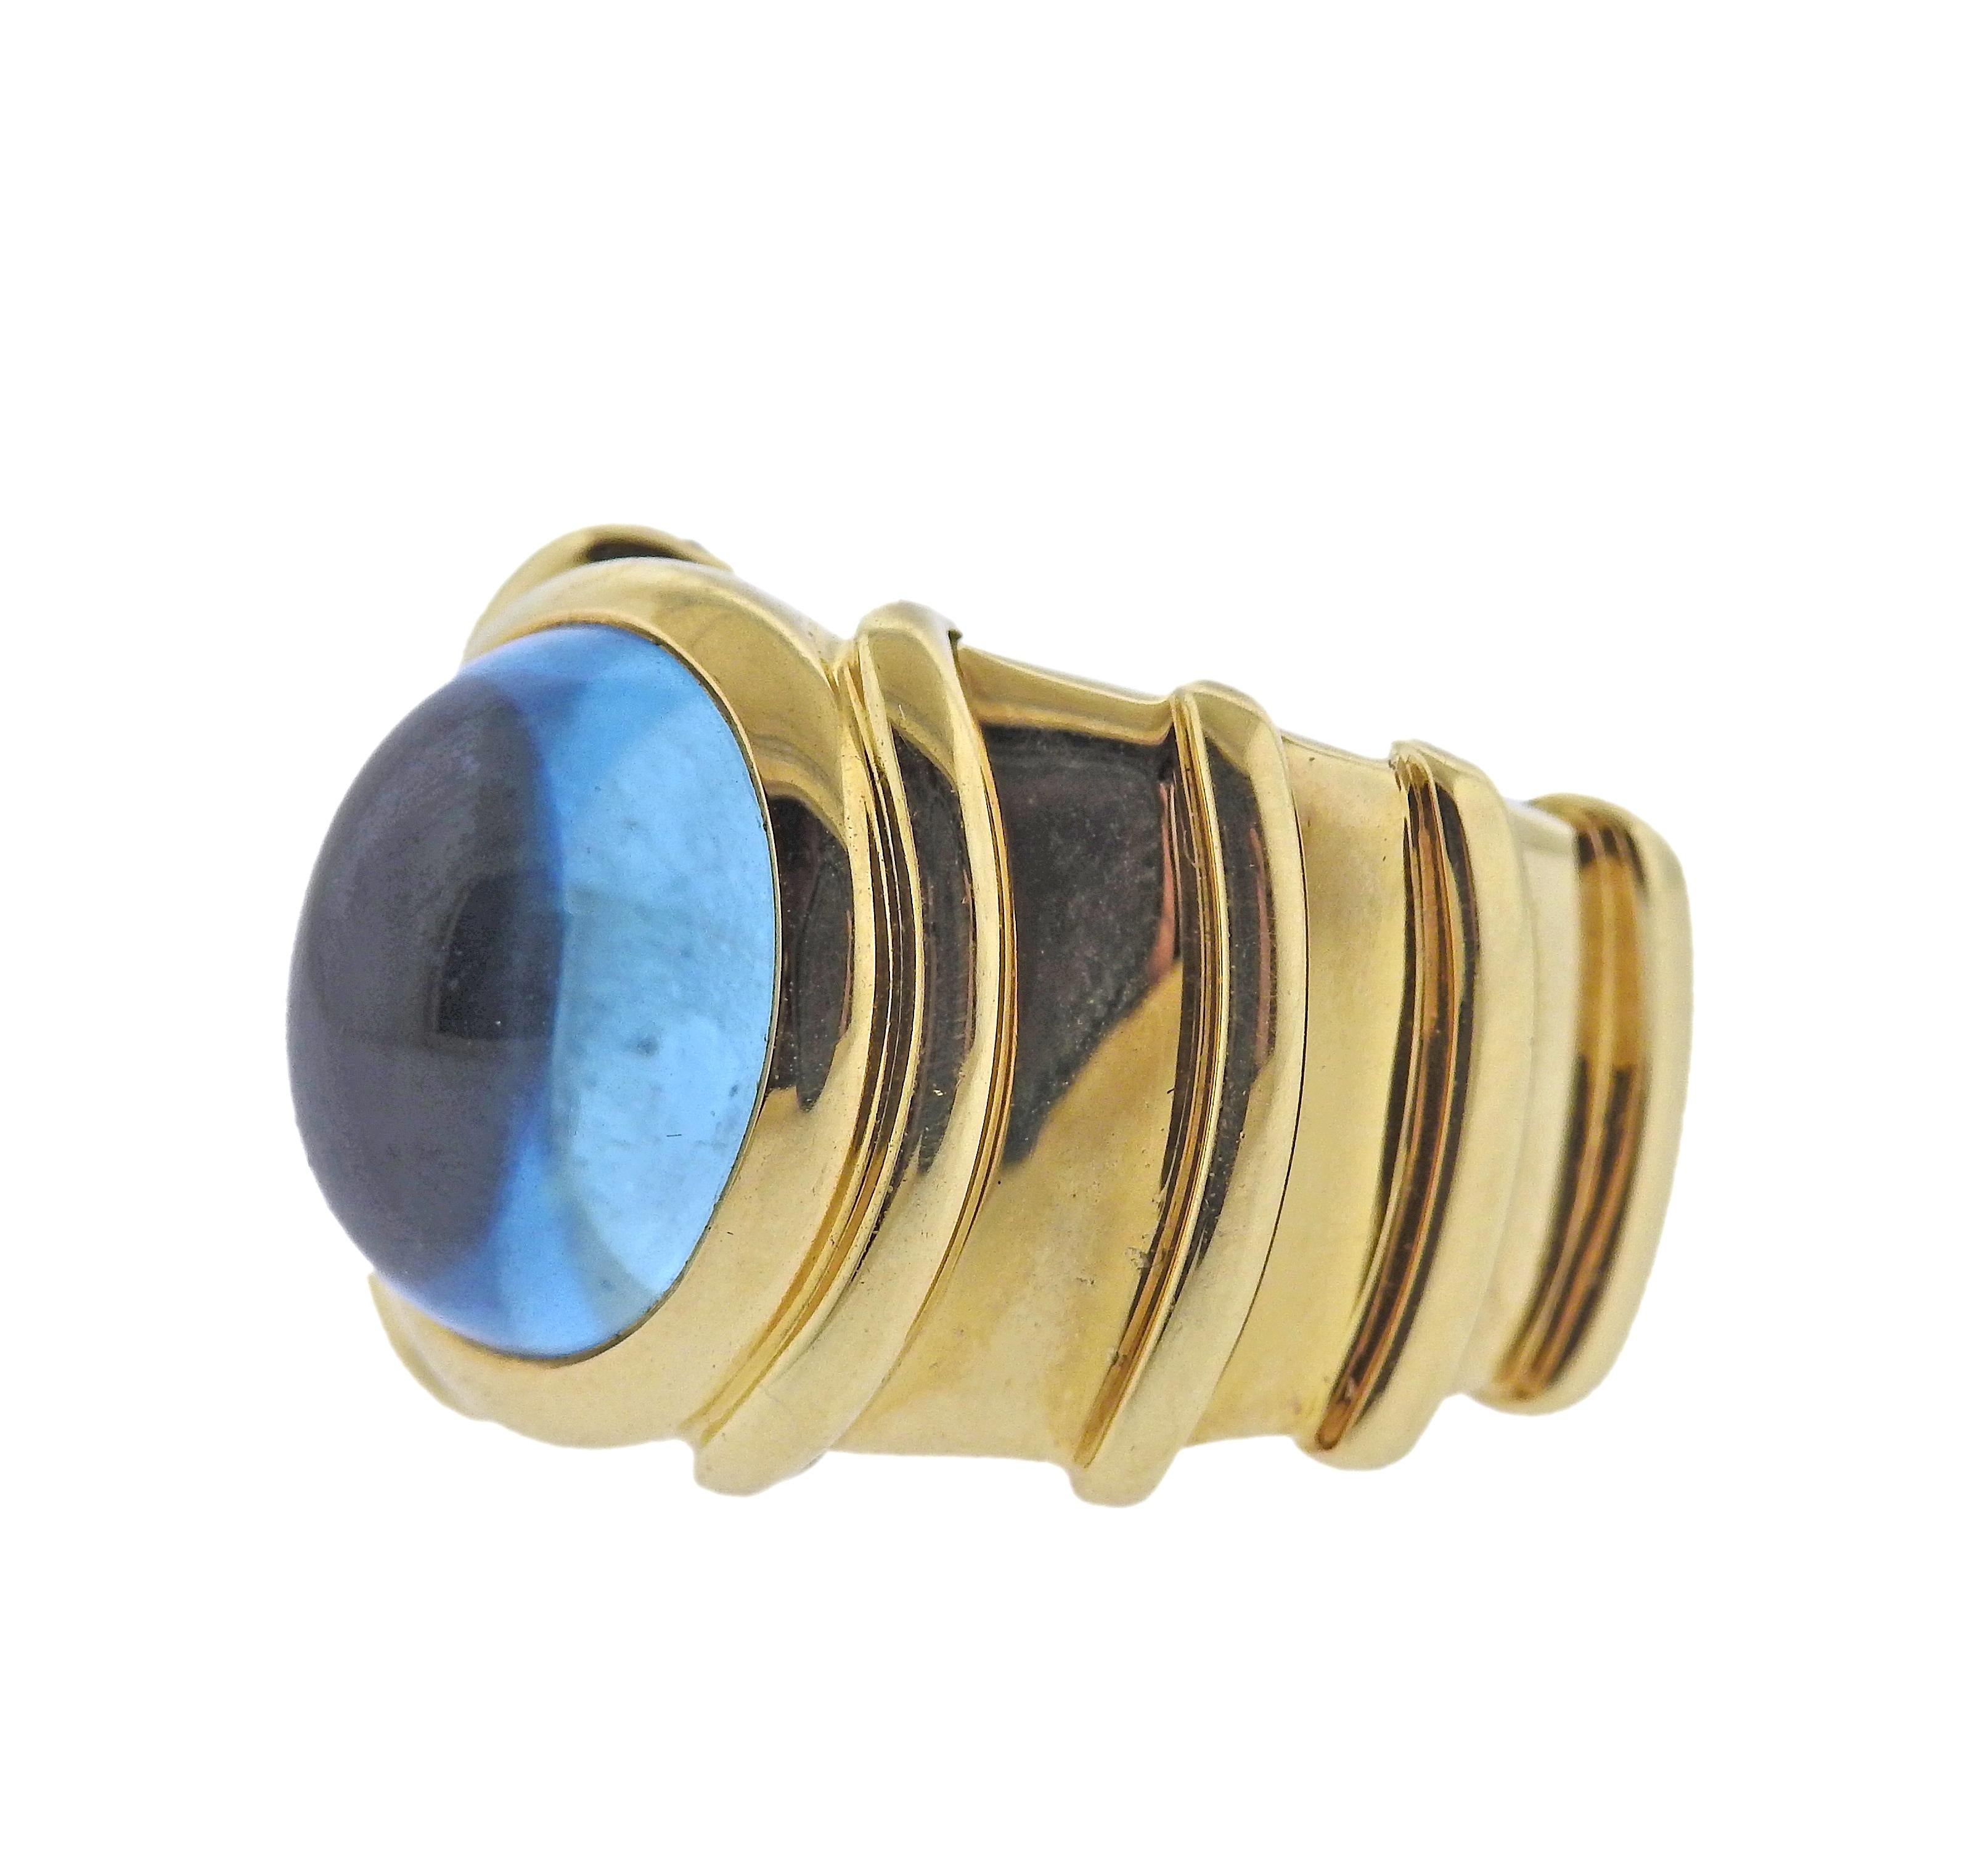 18k gold ring by Marina B, with oval blue topaz cabochon (approx. 12.8mm x 10.7mm). Ring size 5, top of the ring is 16mm wide. Marked: Marina B, AA61, MB, 750. Weight - 20.7 grams.